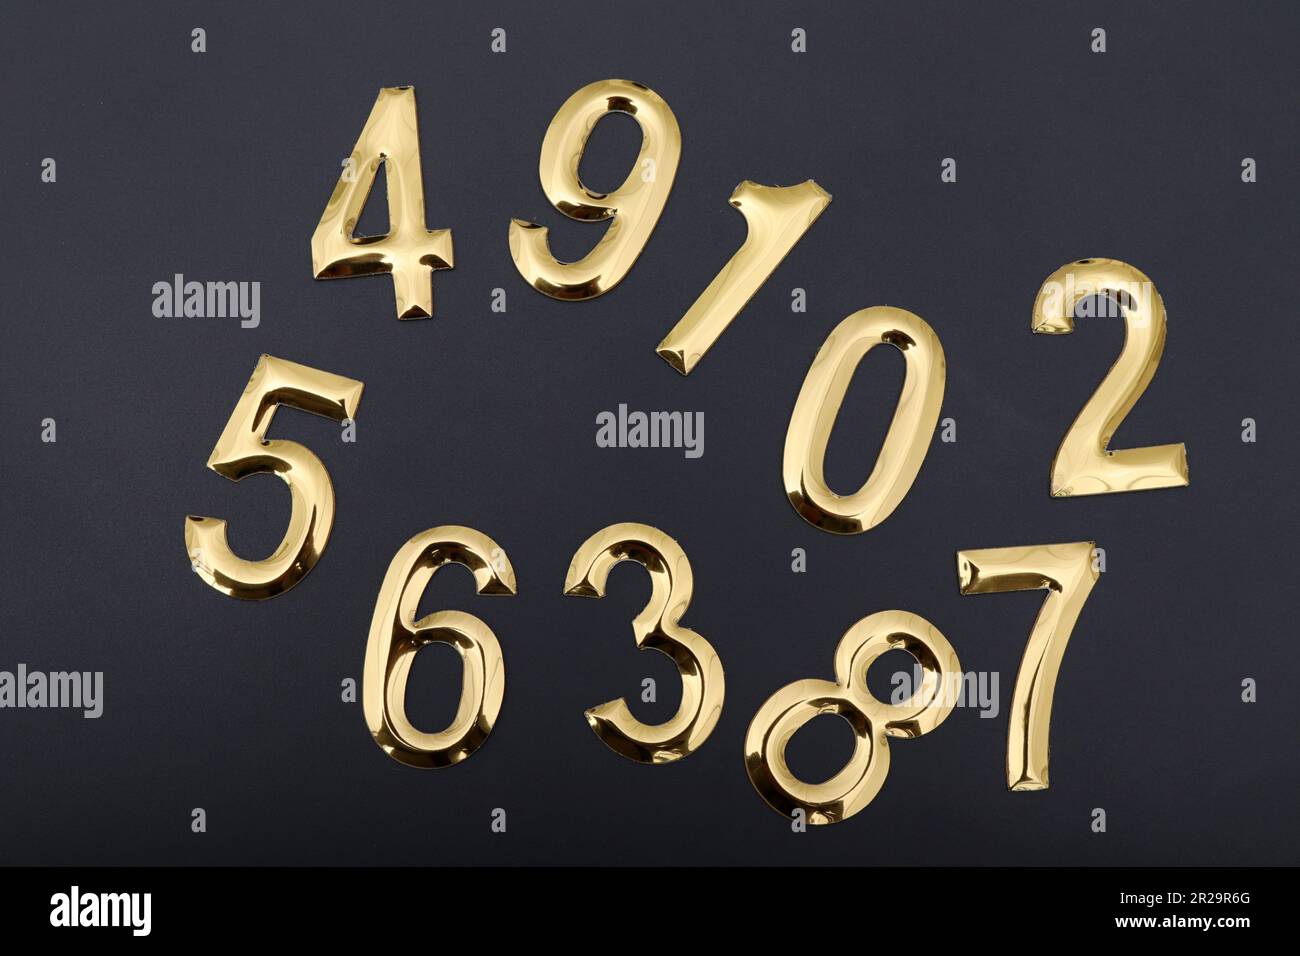 Numbers on a black background Stock Photo